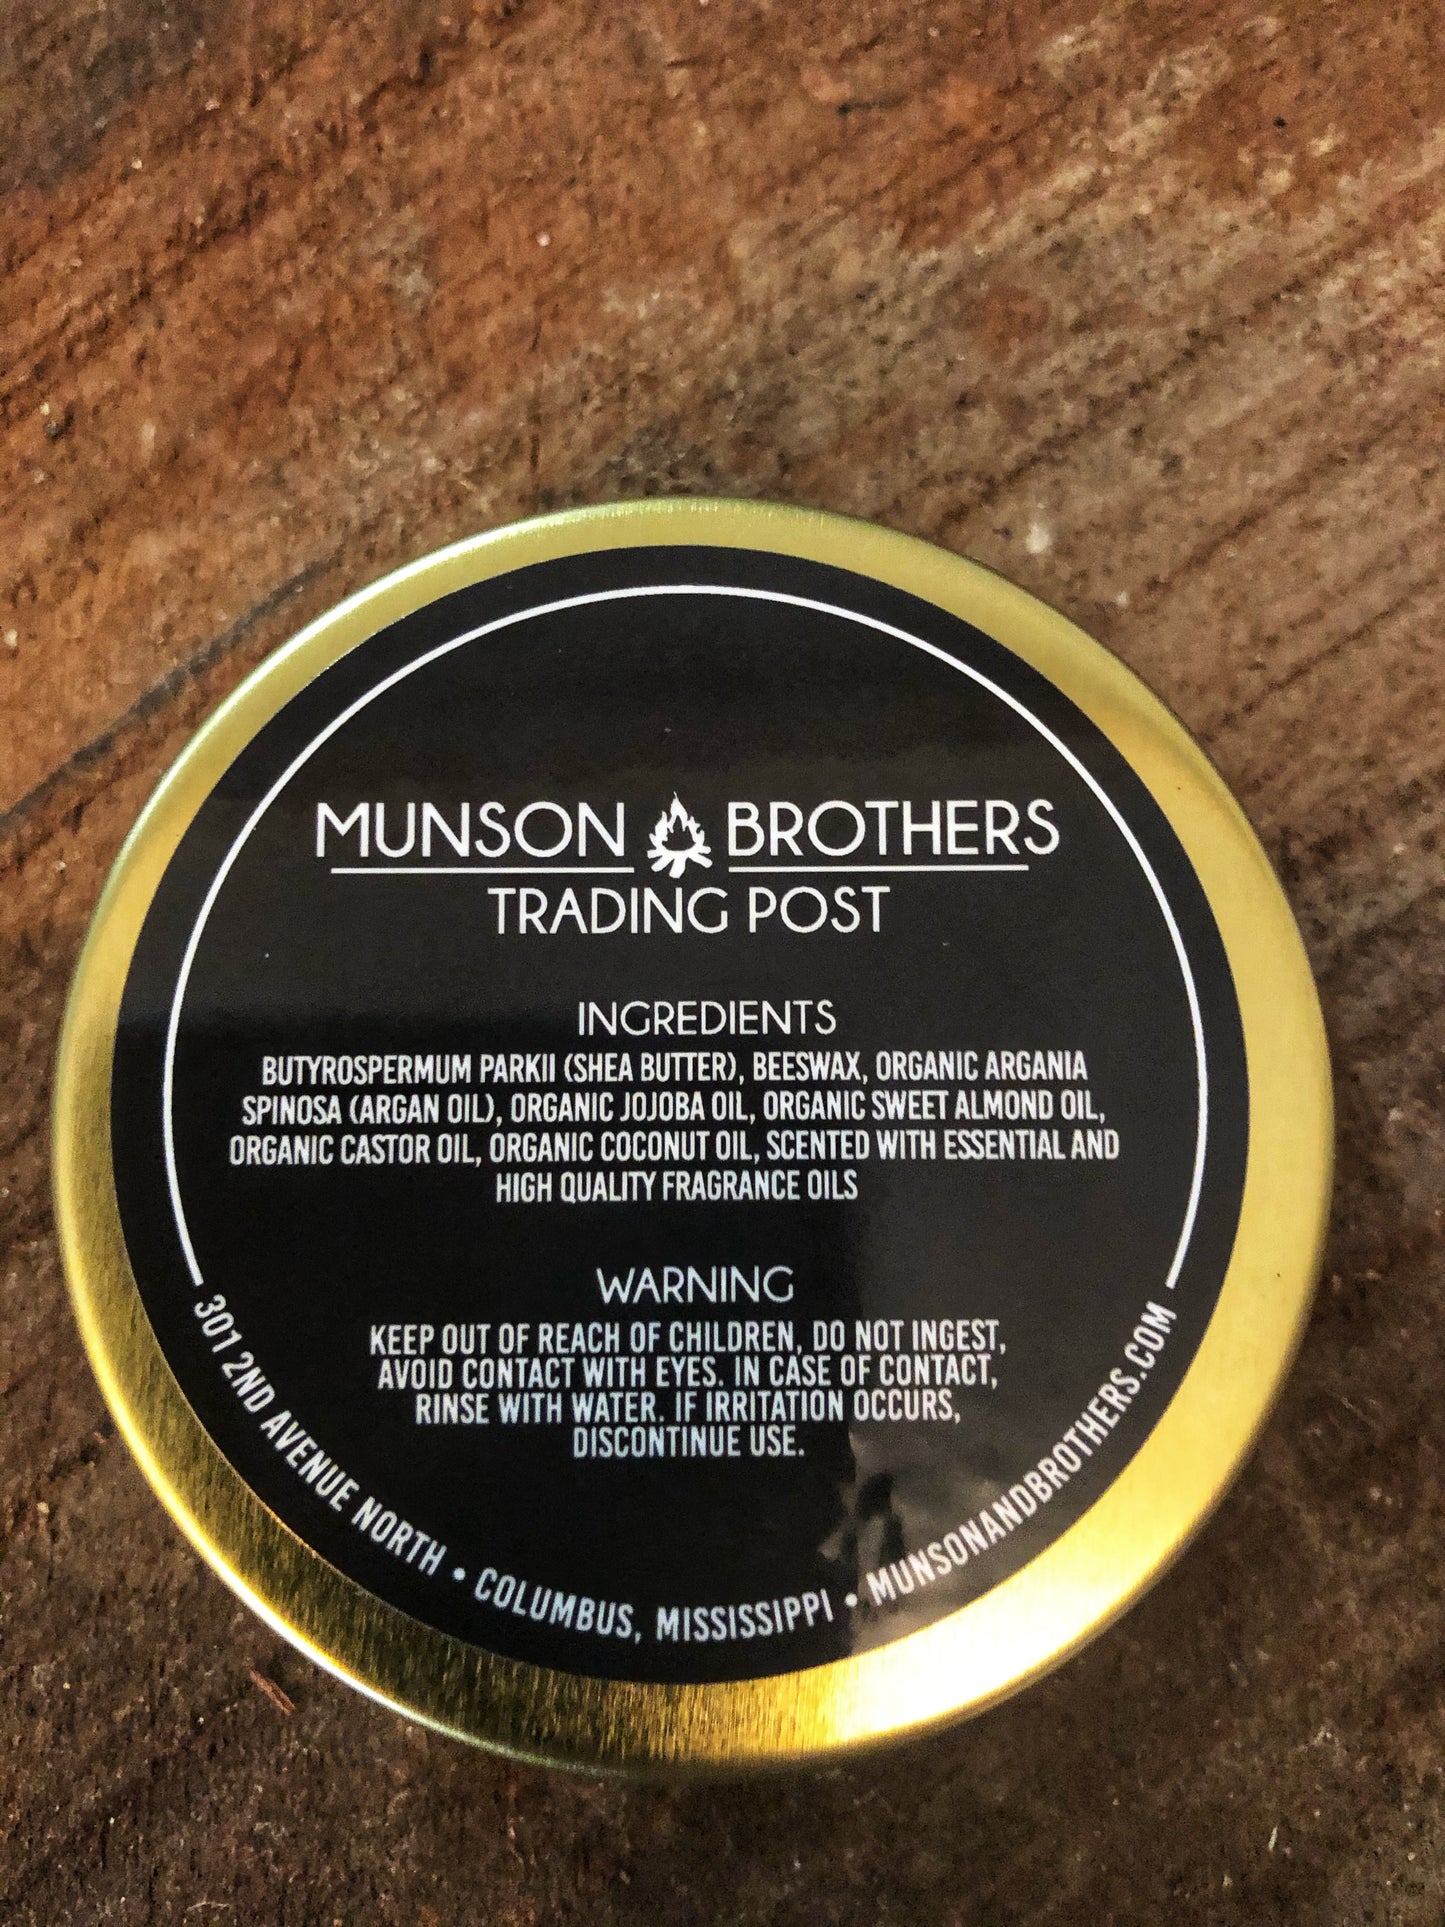 Brother Juniper Oil and Balm